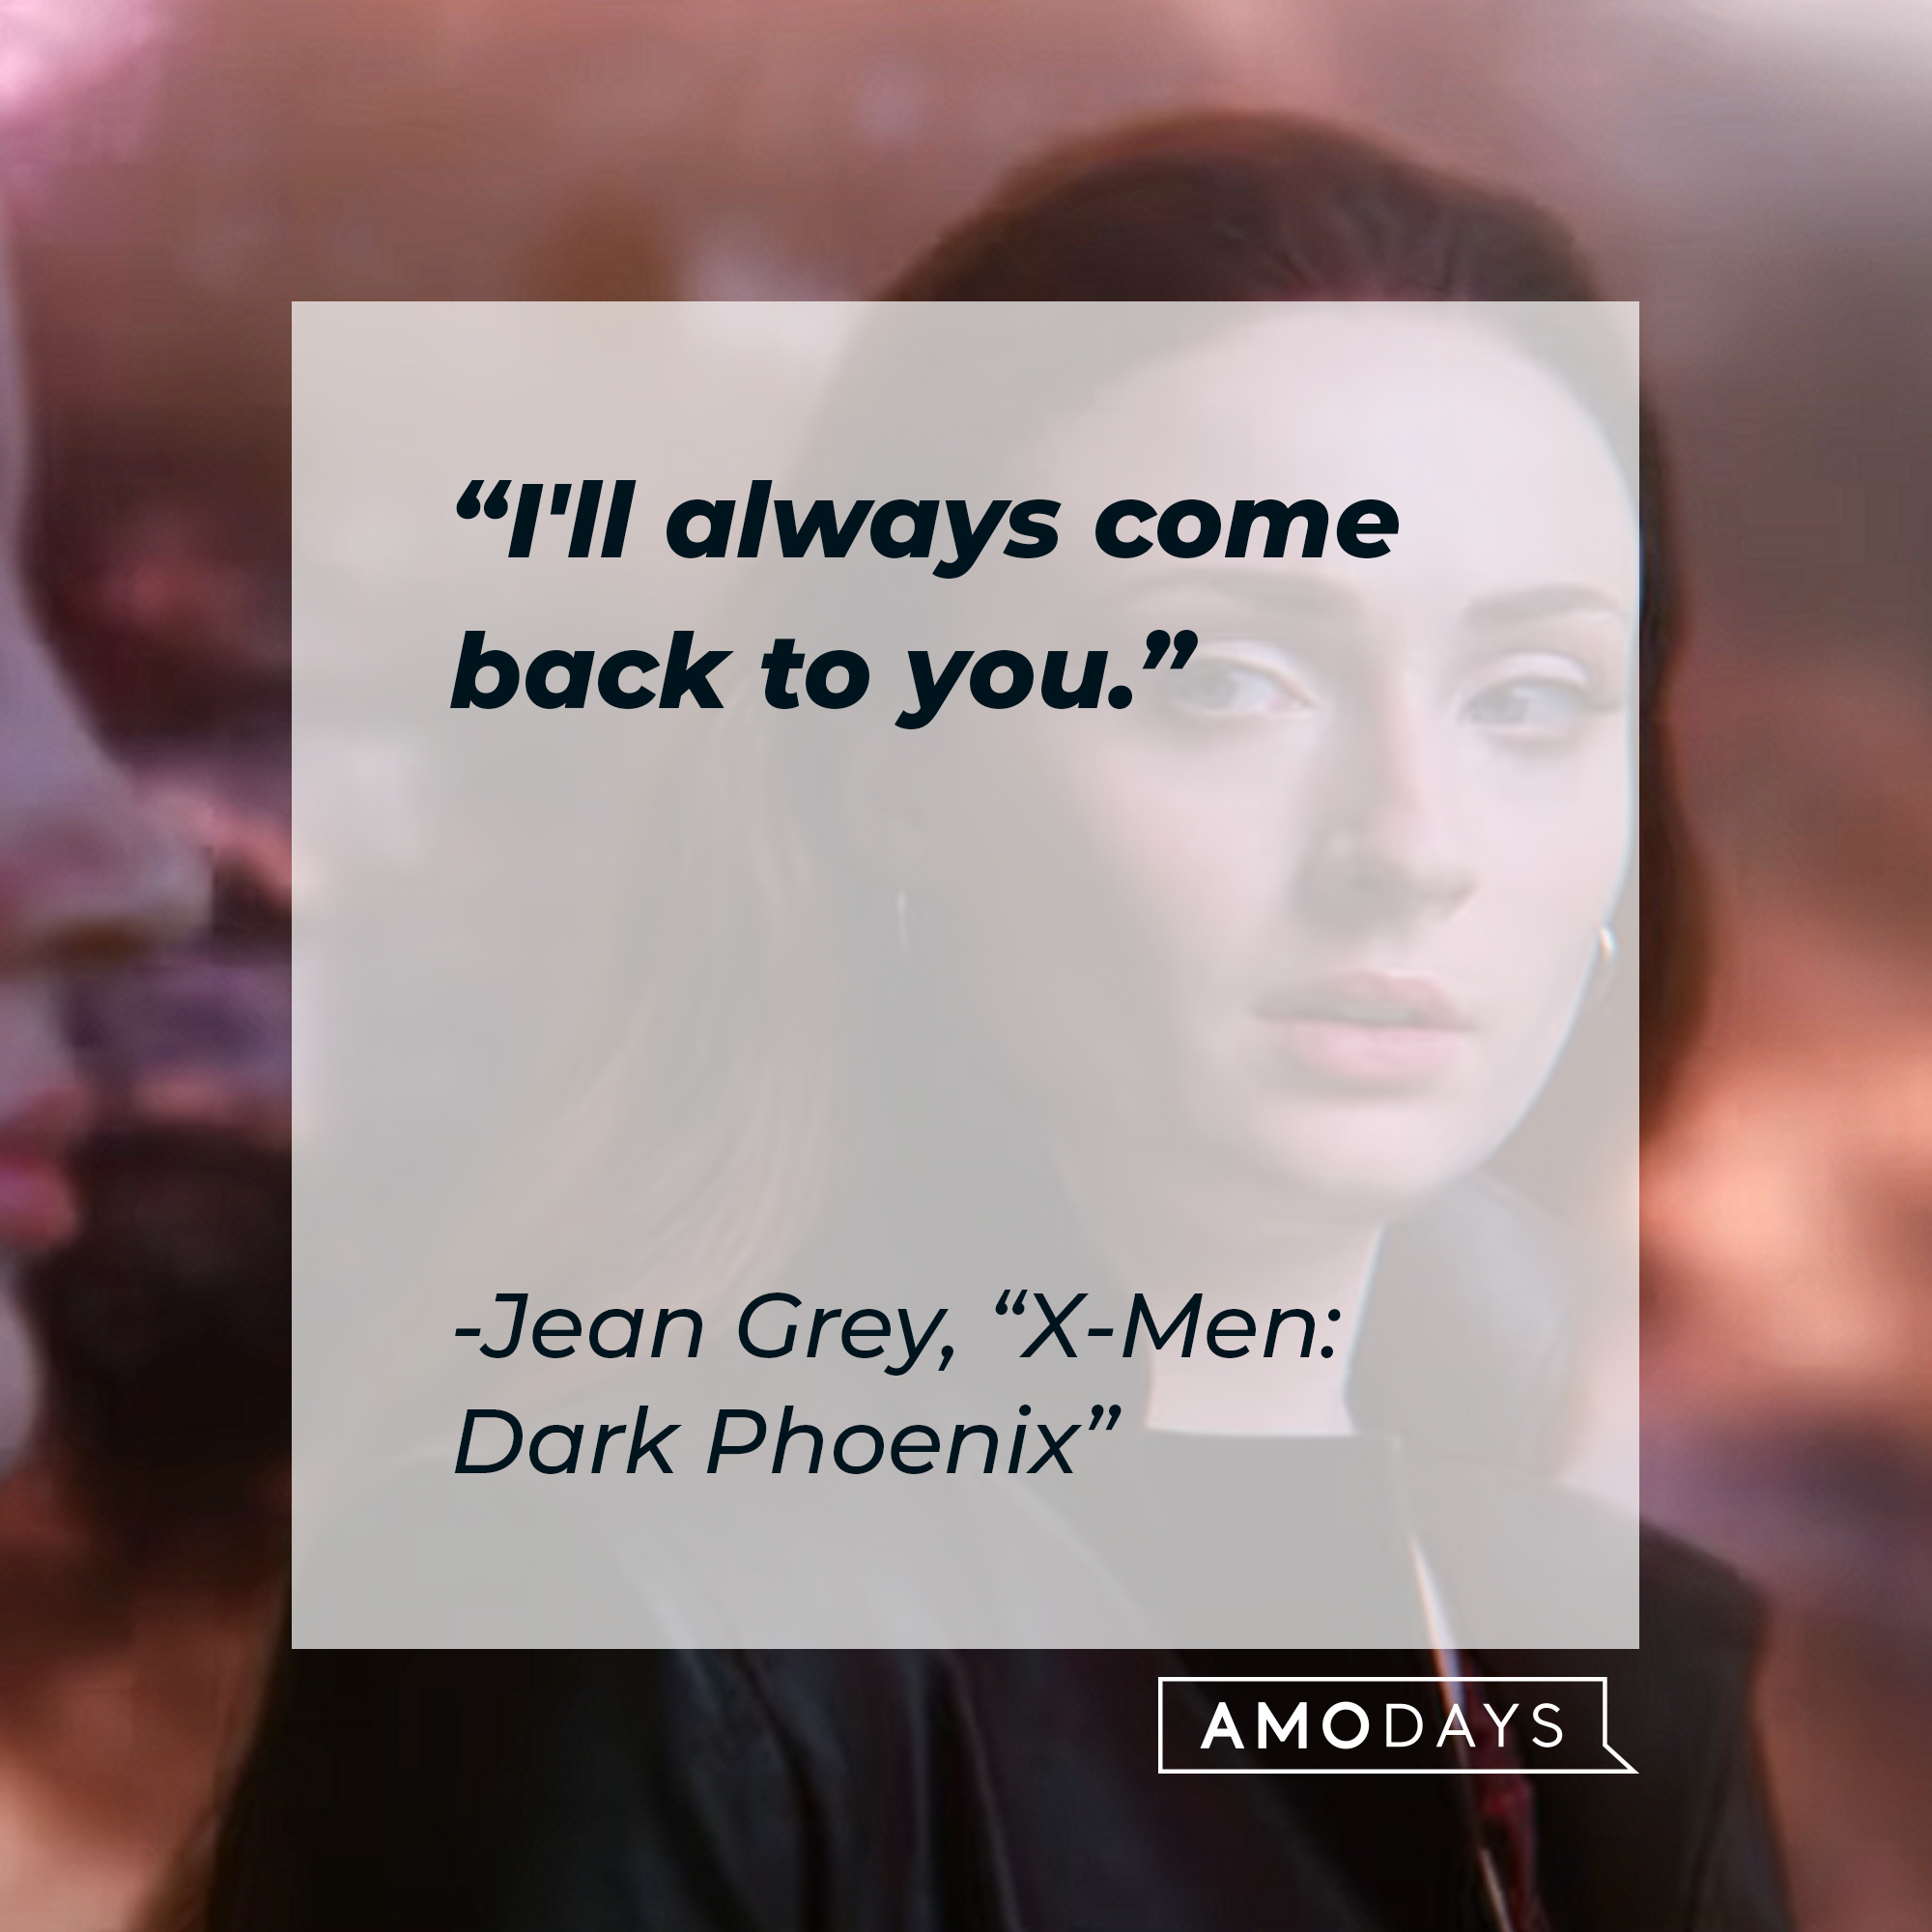 Jean Grey’s quote: "I'll always come back to you." | Image: Youtube.com/20thCenturyStudios